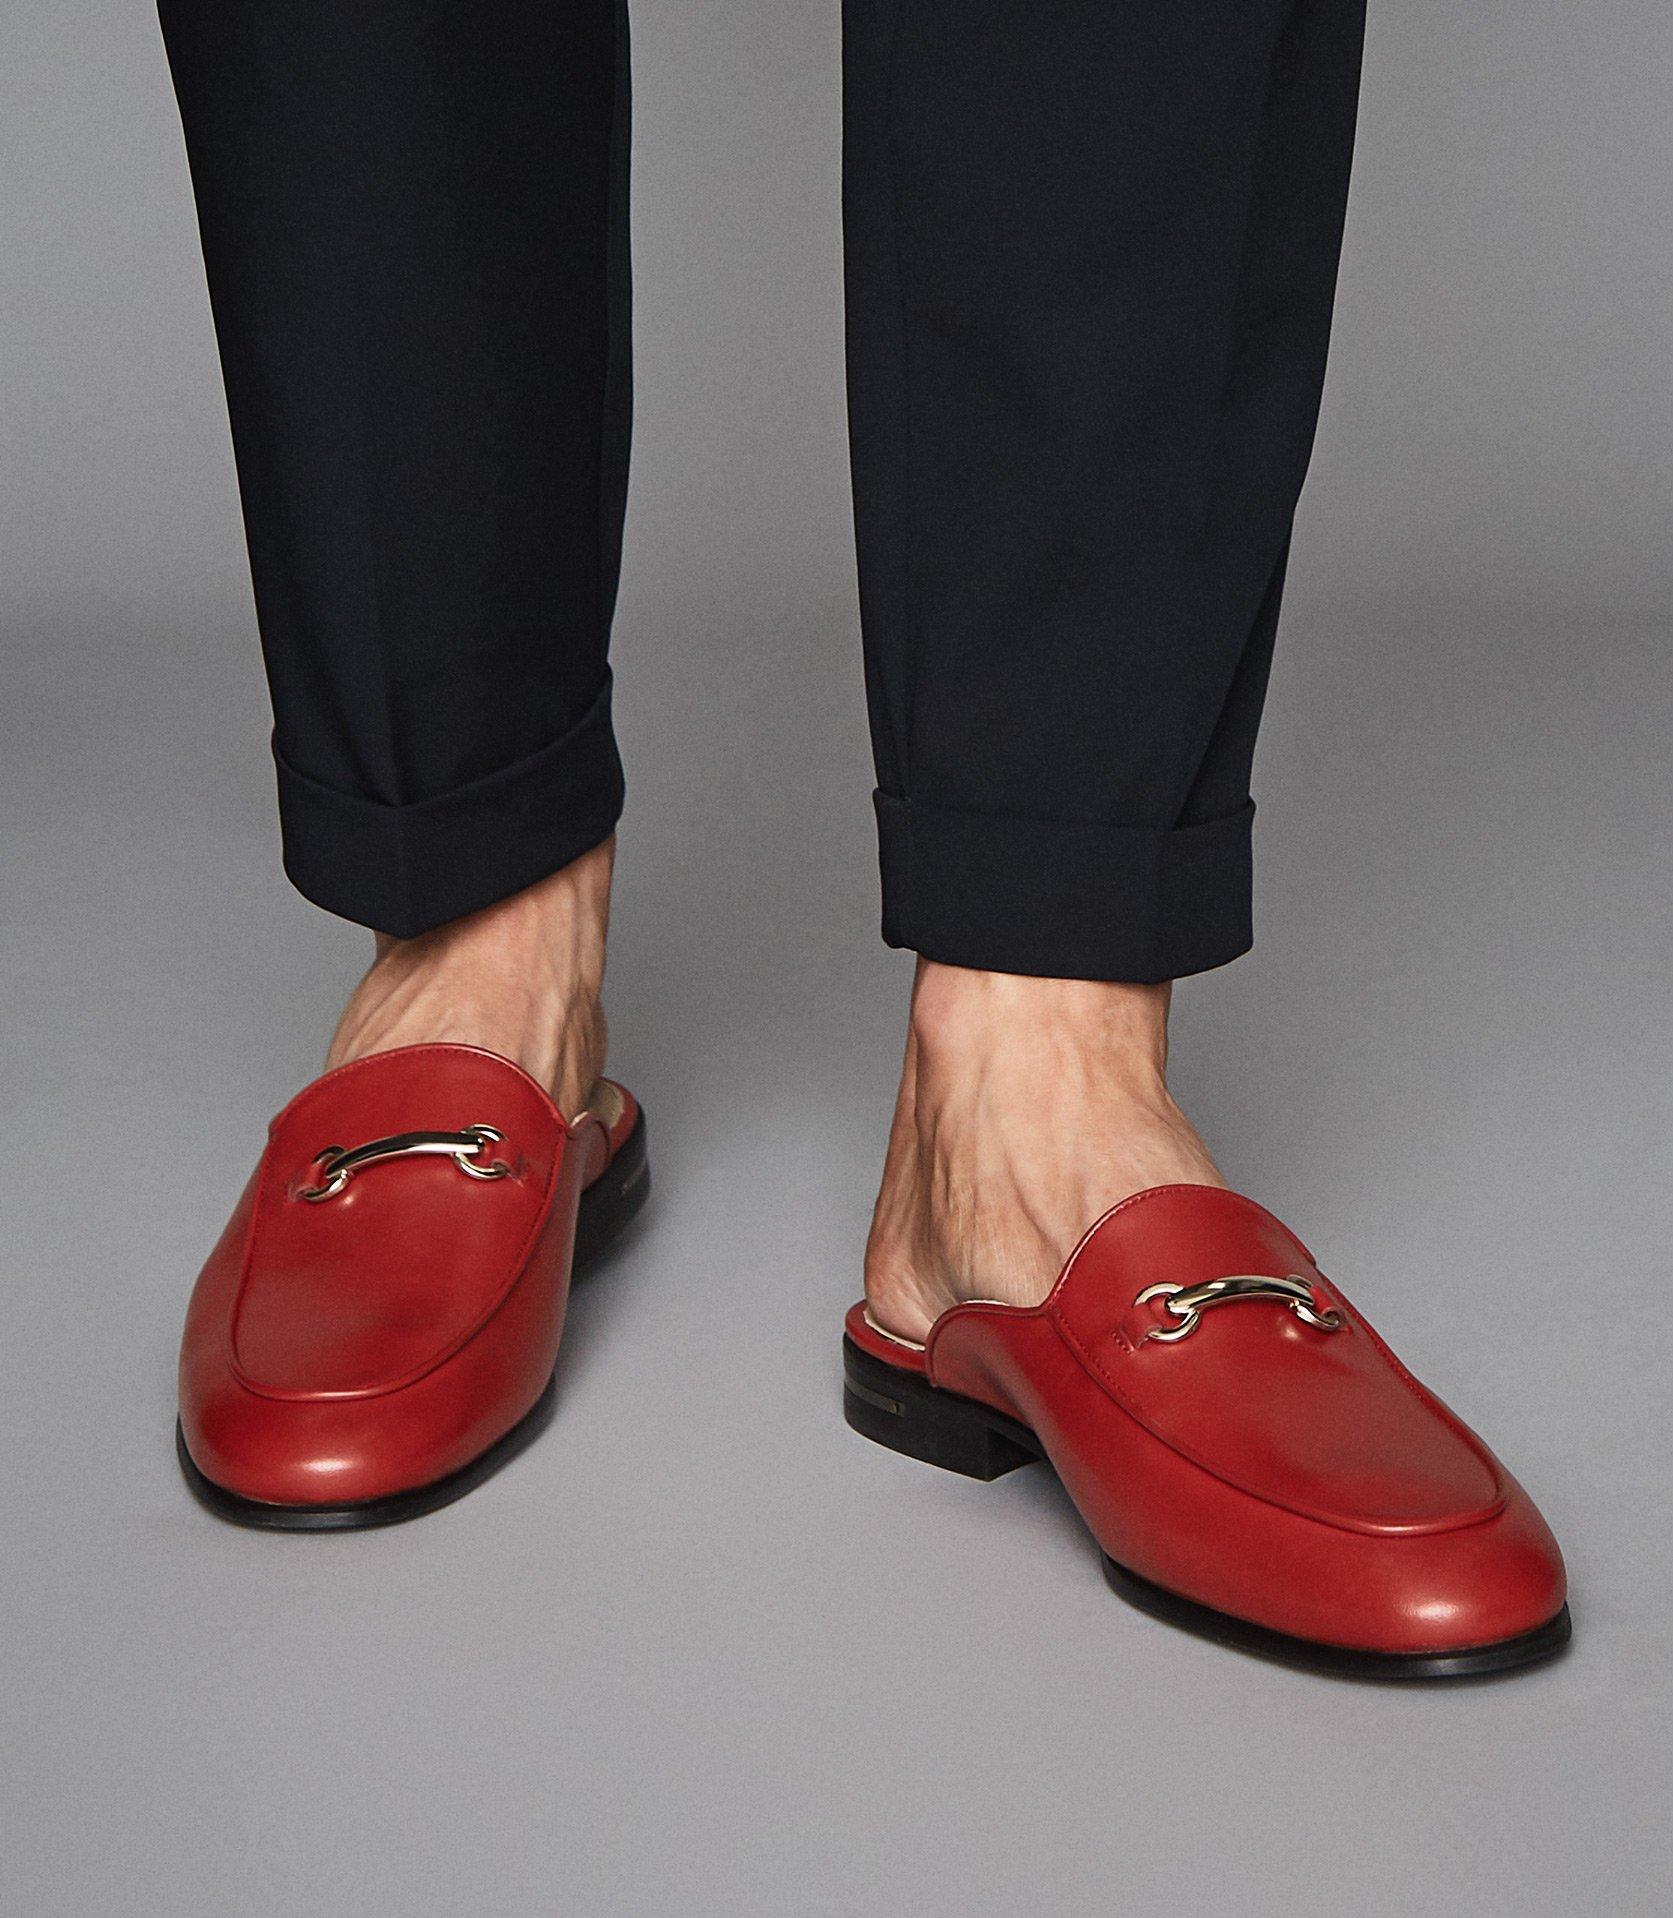 Reiss Lewis - Horsebit Leather Mules in Red for Men - Lyst